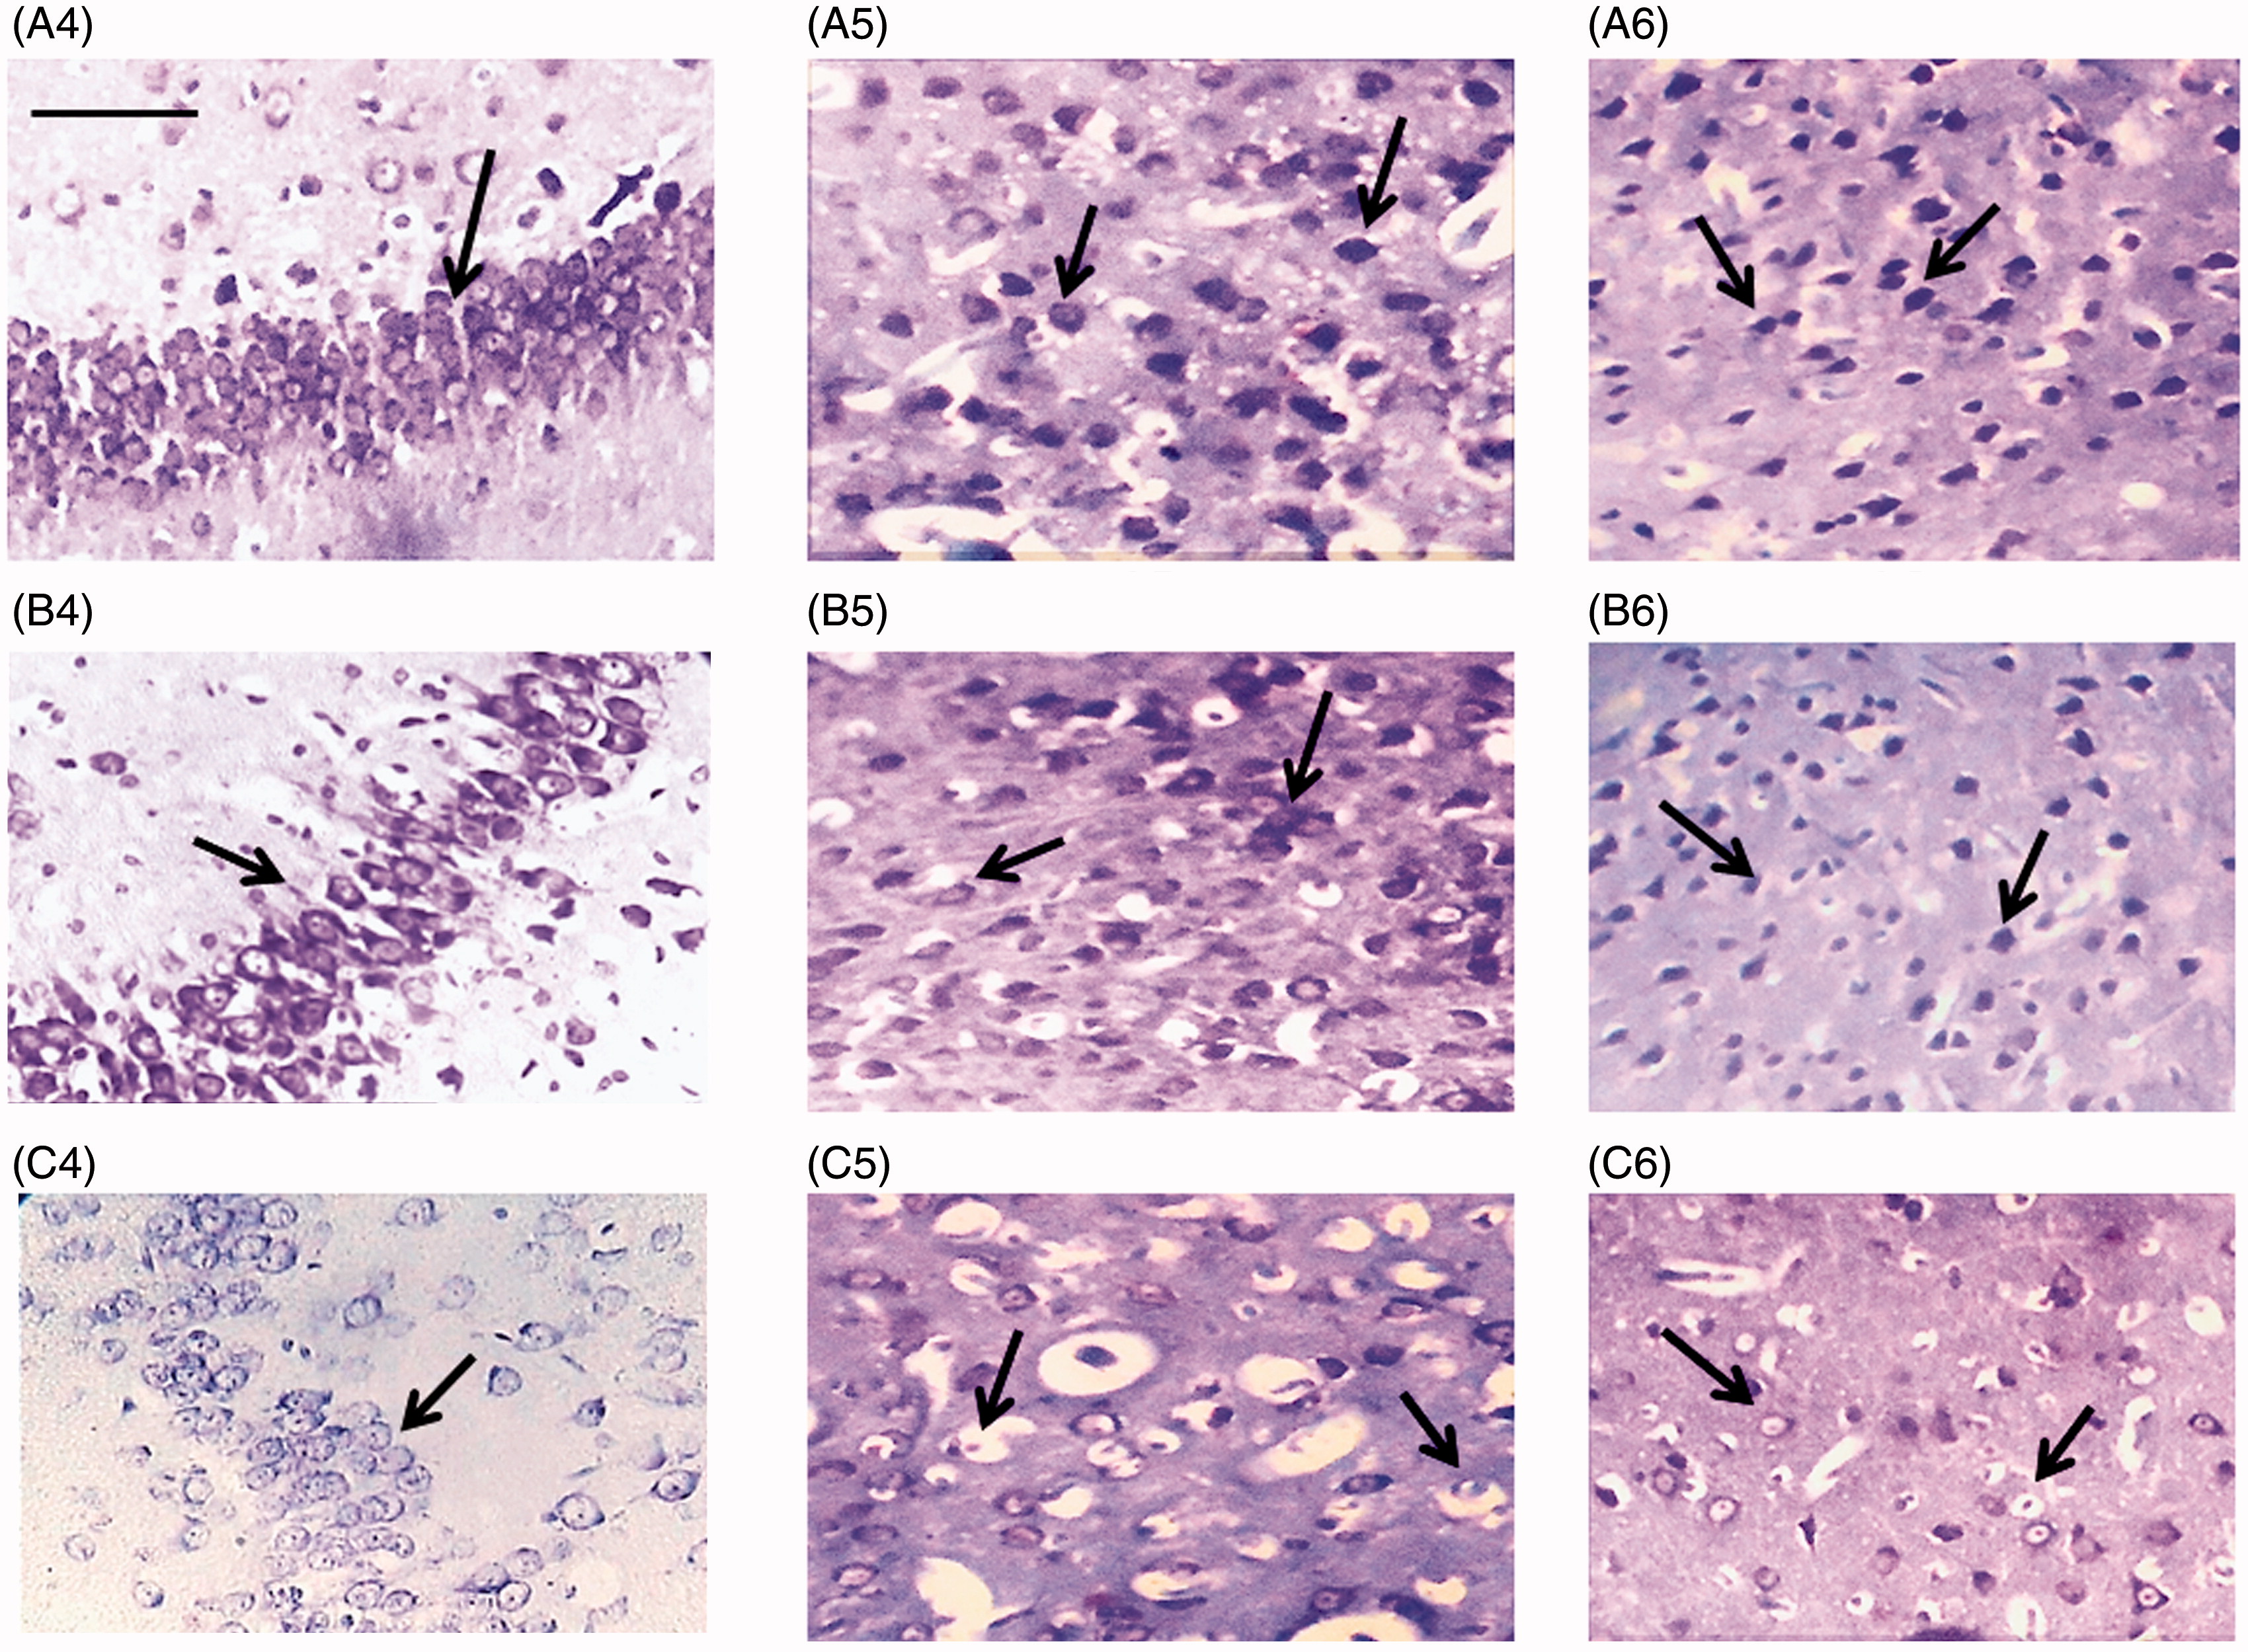 Figure 2. Nissl (cresyl violet) staining of neurons in different brain areas in rats. Representative micrographs are shown. Control rats: (A) (top row); sham-operated rats: (B) (middle row); ICIR [icv colchicine injected] rats: (C) (last row). Hippocampus: 4 (left column), corpus striatum: 5 (middle column), amygdala: 6 (right column). Letter and number indicate group and specific brain region (e.g. A4: Hippocampus, control rat). Magnification: 400 × , length of bar = 16.18 μm. Arrows indicate Nissl granules.